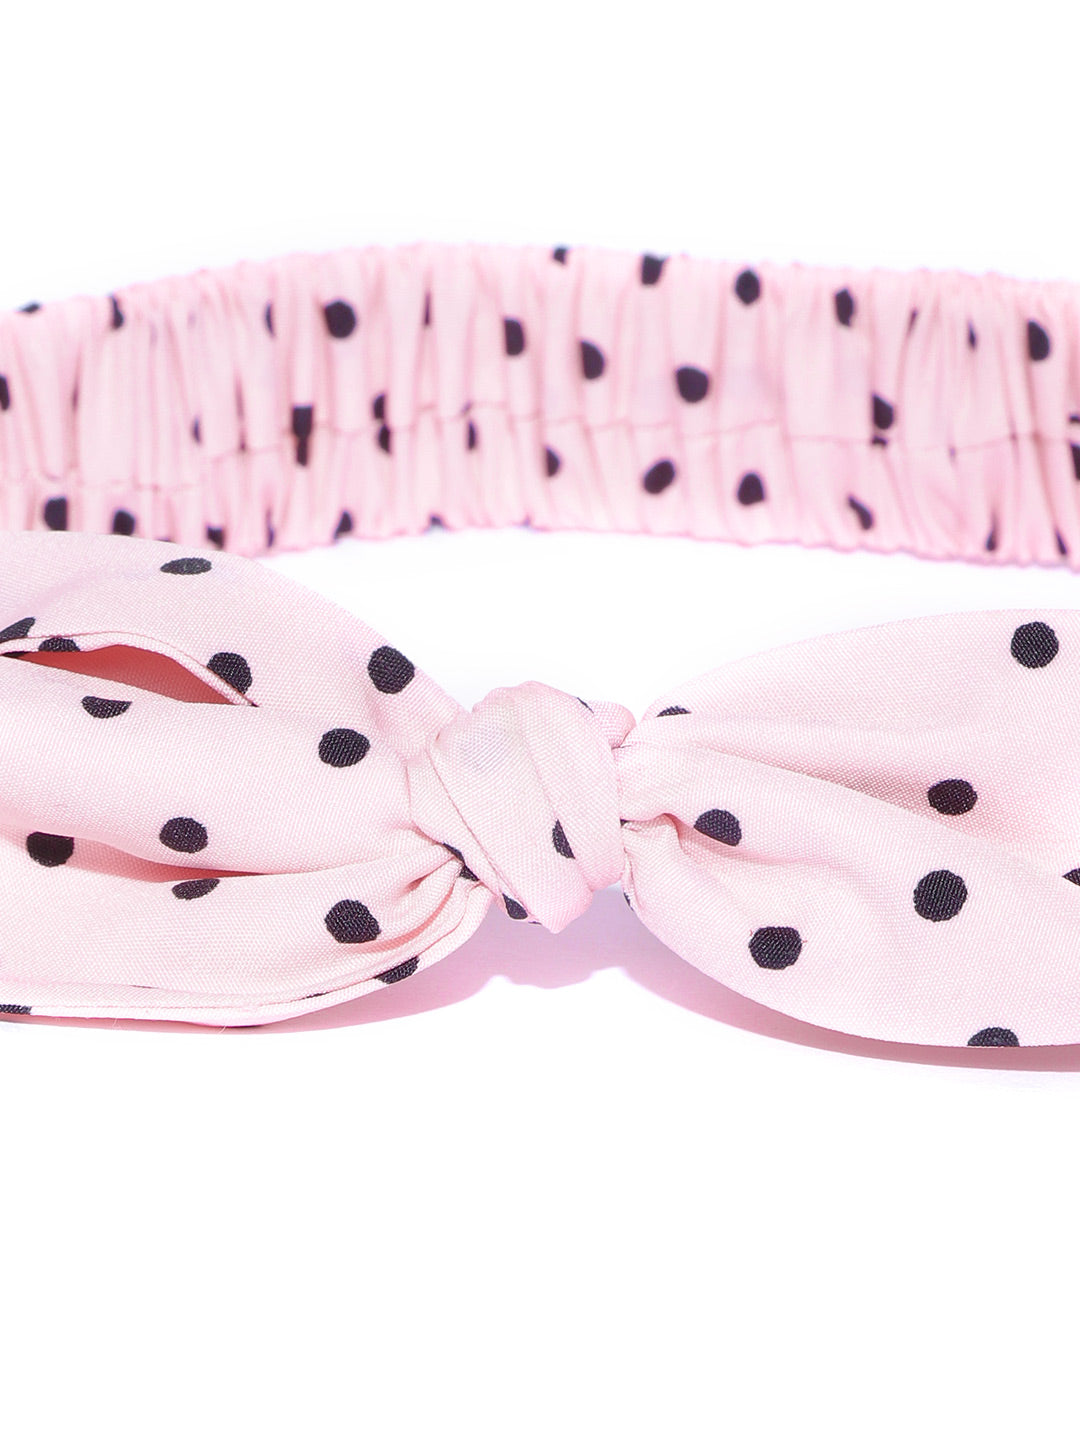 Blueberry KIDS set of 2 red and peach knot detailing hairband